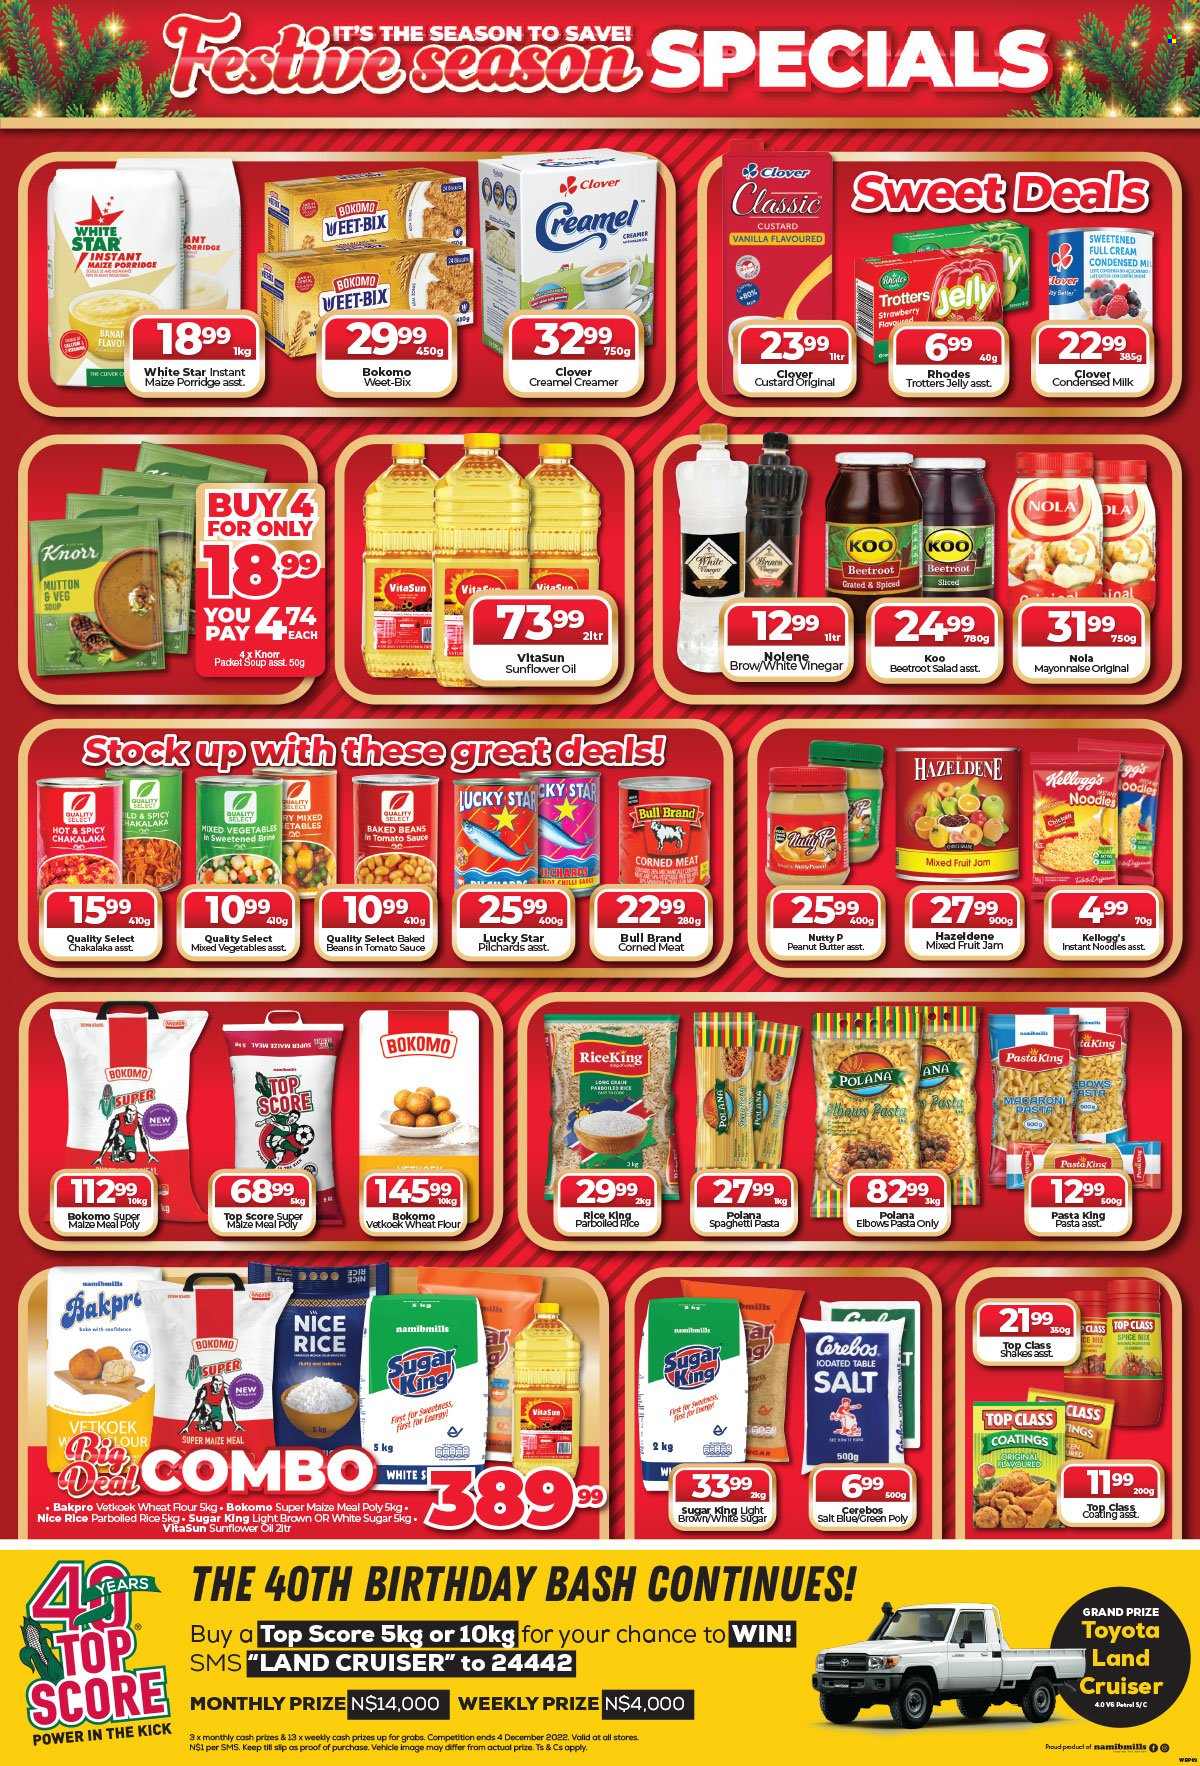 Woermann Brock catalogue  - 23/11/2022 - 06/12/2022 - Sales products - beans, salad, sardines, spaghetti, macaroni, soup, pasta, instant noodles, Knorr, chakalaka, noodles, beetroot salad, Clover, milk, condensed milk, shakes, creamer, mayonnaise, mixed vegetables, jelly, cereal bar, Kellogg's, flour, sugar, wheat flour, maize meal, White Star, corned meat, baked beans, Koo, Weet-Bix, porridge, rice, parboiled rice, sunflower oil, vinegar, oil, jam, peanut butter, Hazeldene, mutton meat. Page 3.